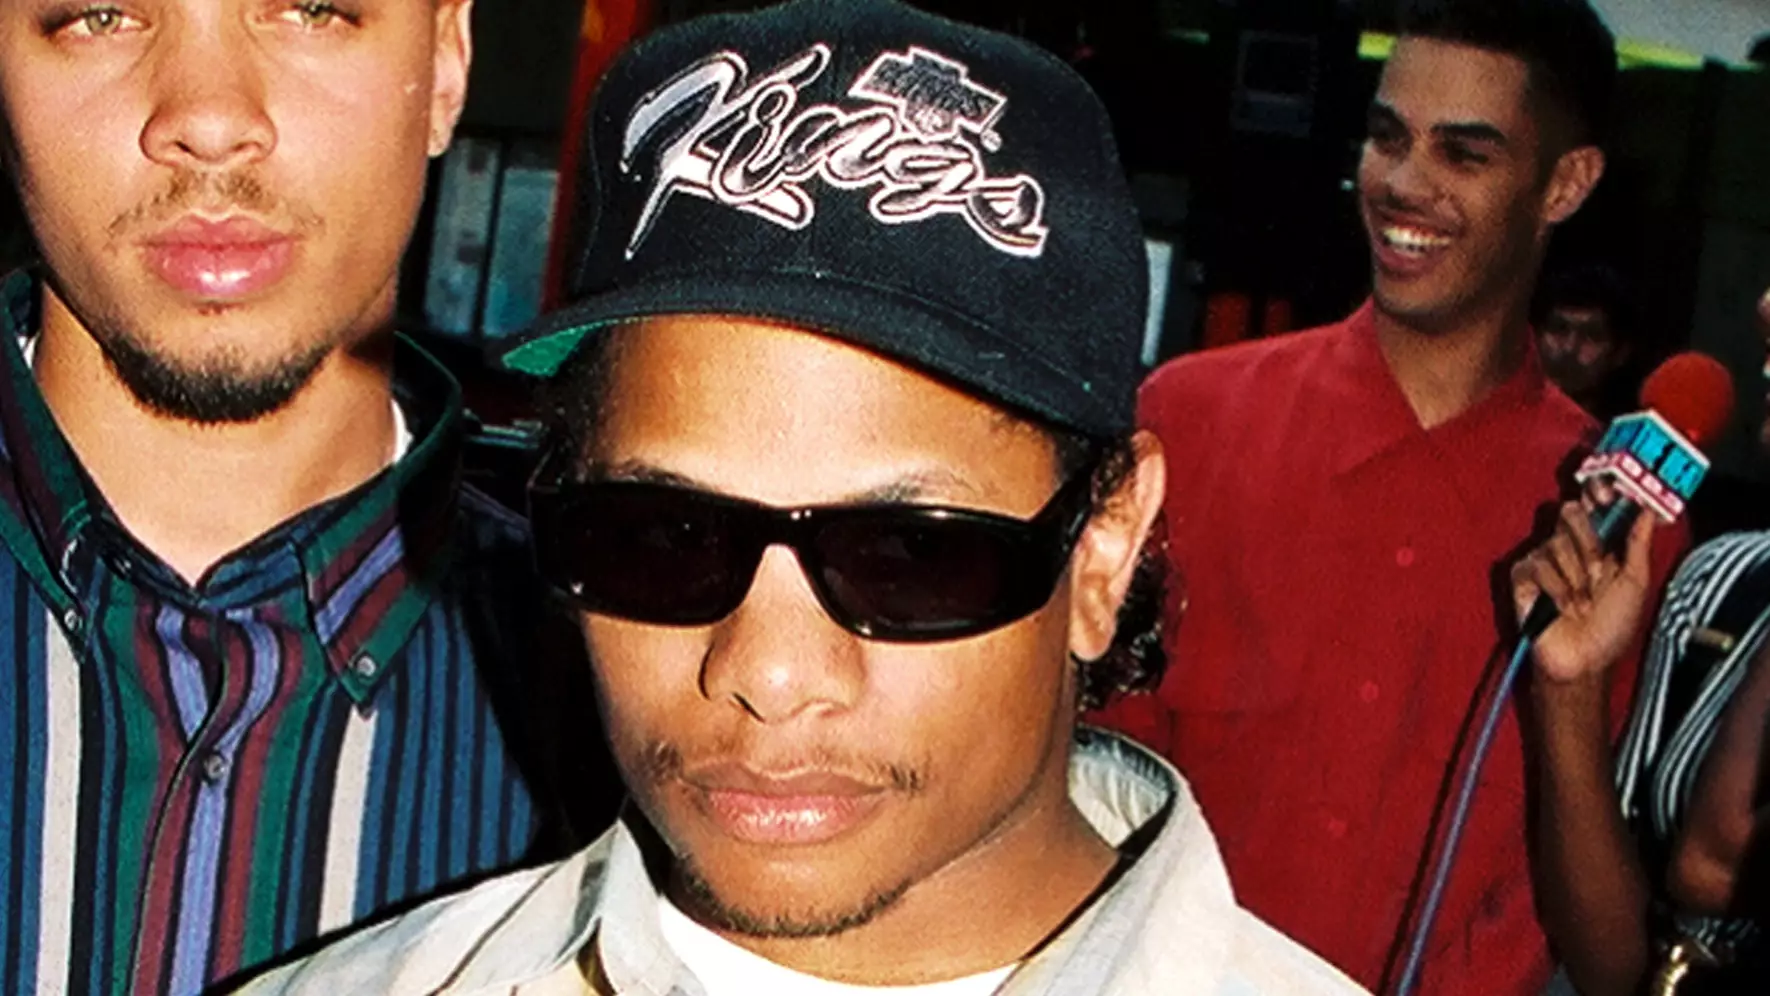 NWA Rapper Eazy-E Gets Extravagant New Tombstone On 55th Birthday